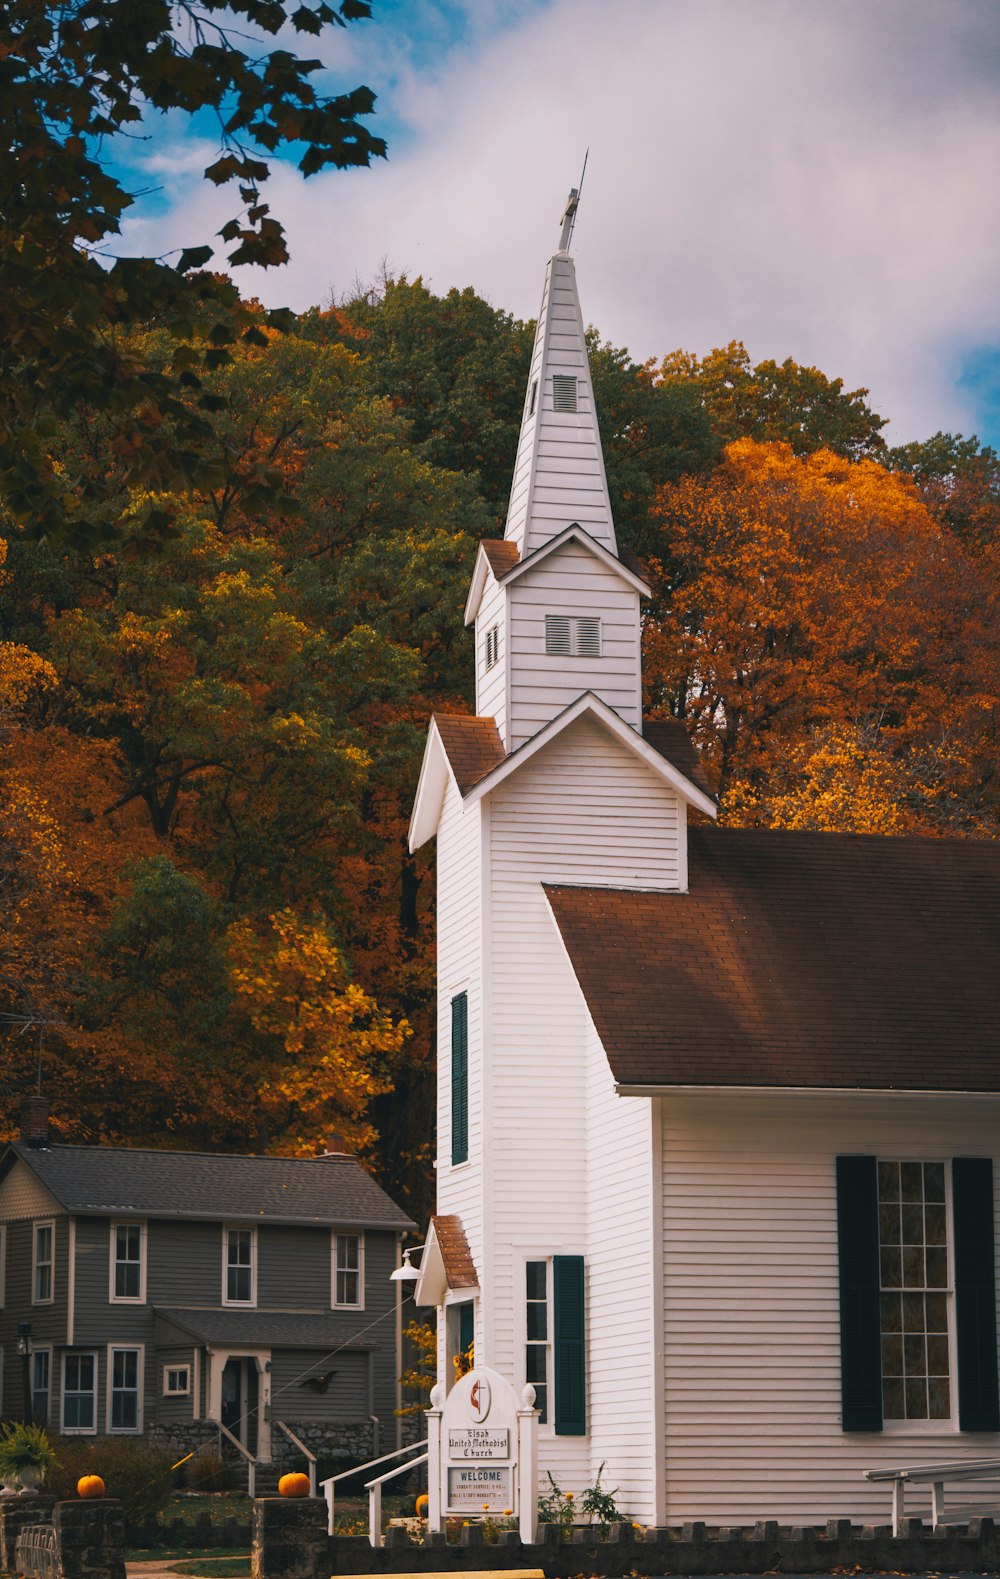 a white church with a steeple surrounded by trees